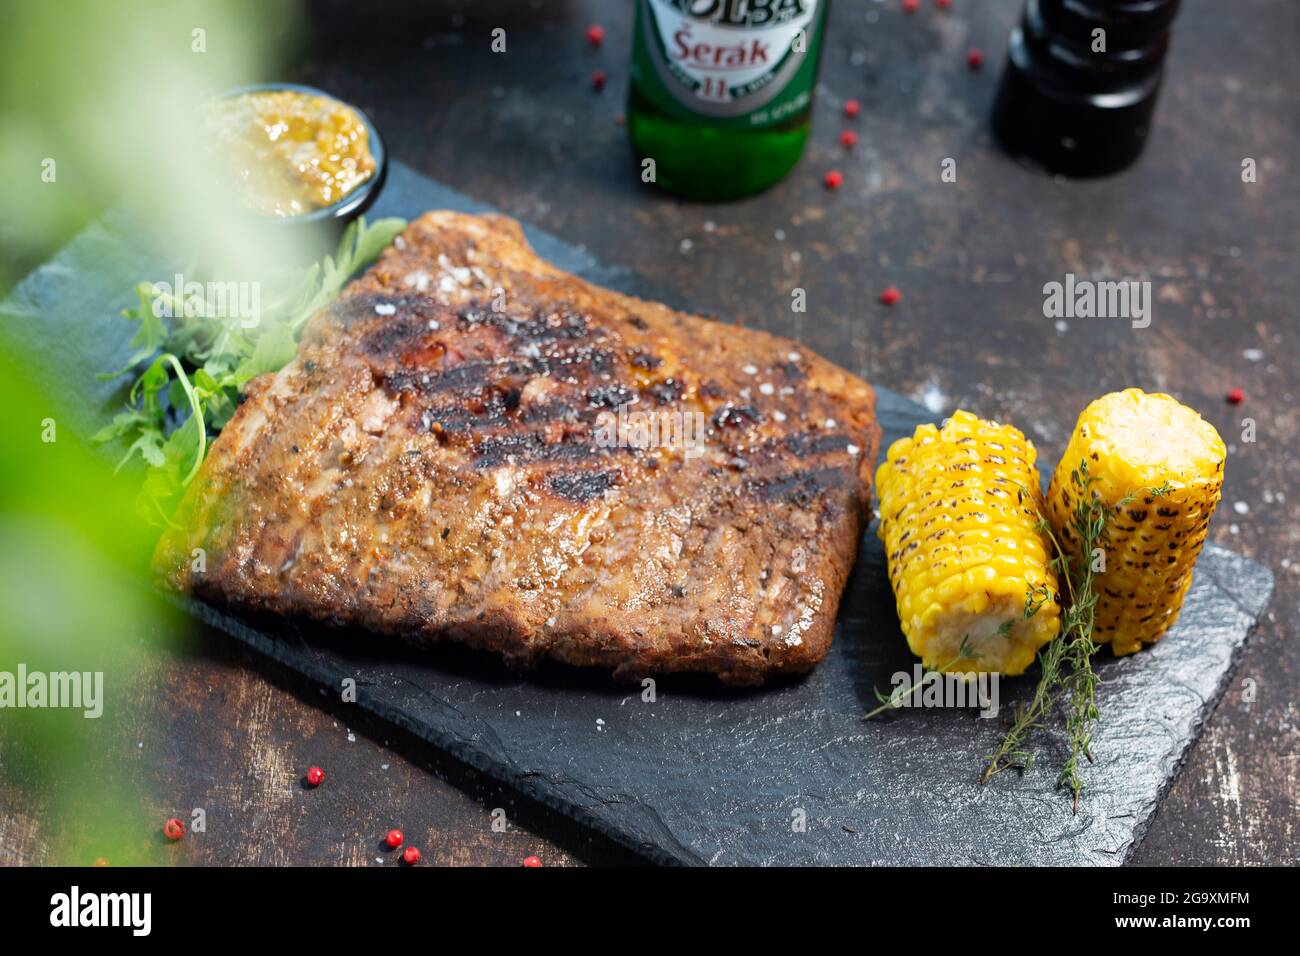 Grilled barbecue ribs, grilled corn cob, mustard sauce. The cook cooks and serves an appetizing dish. The finished dish served on a plate. Serving pro Stock Photo